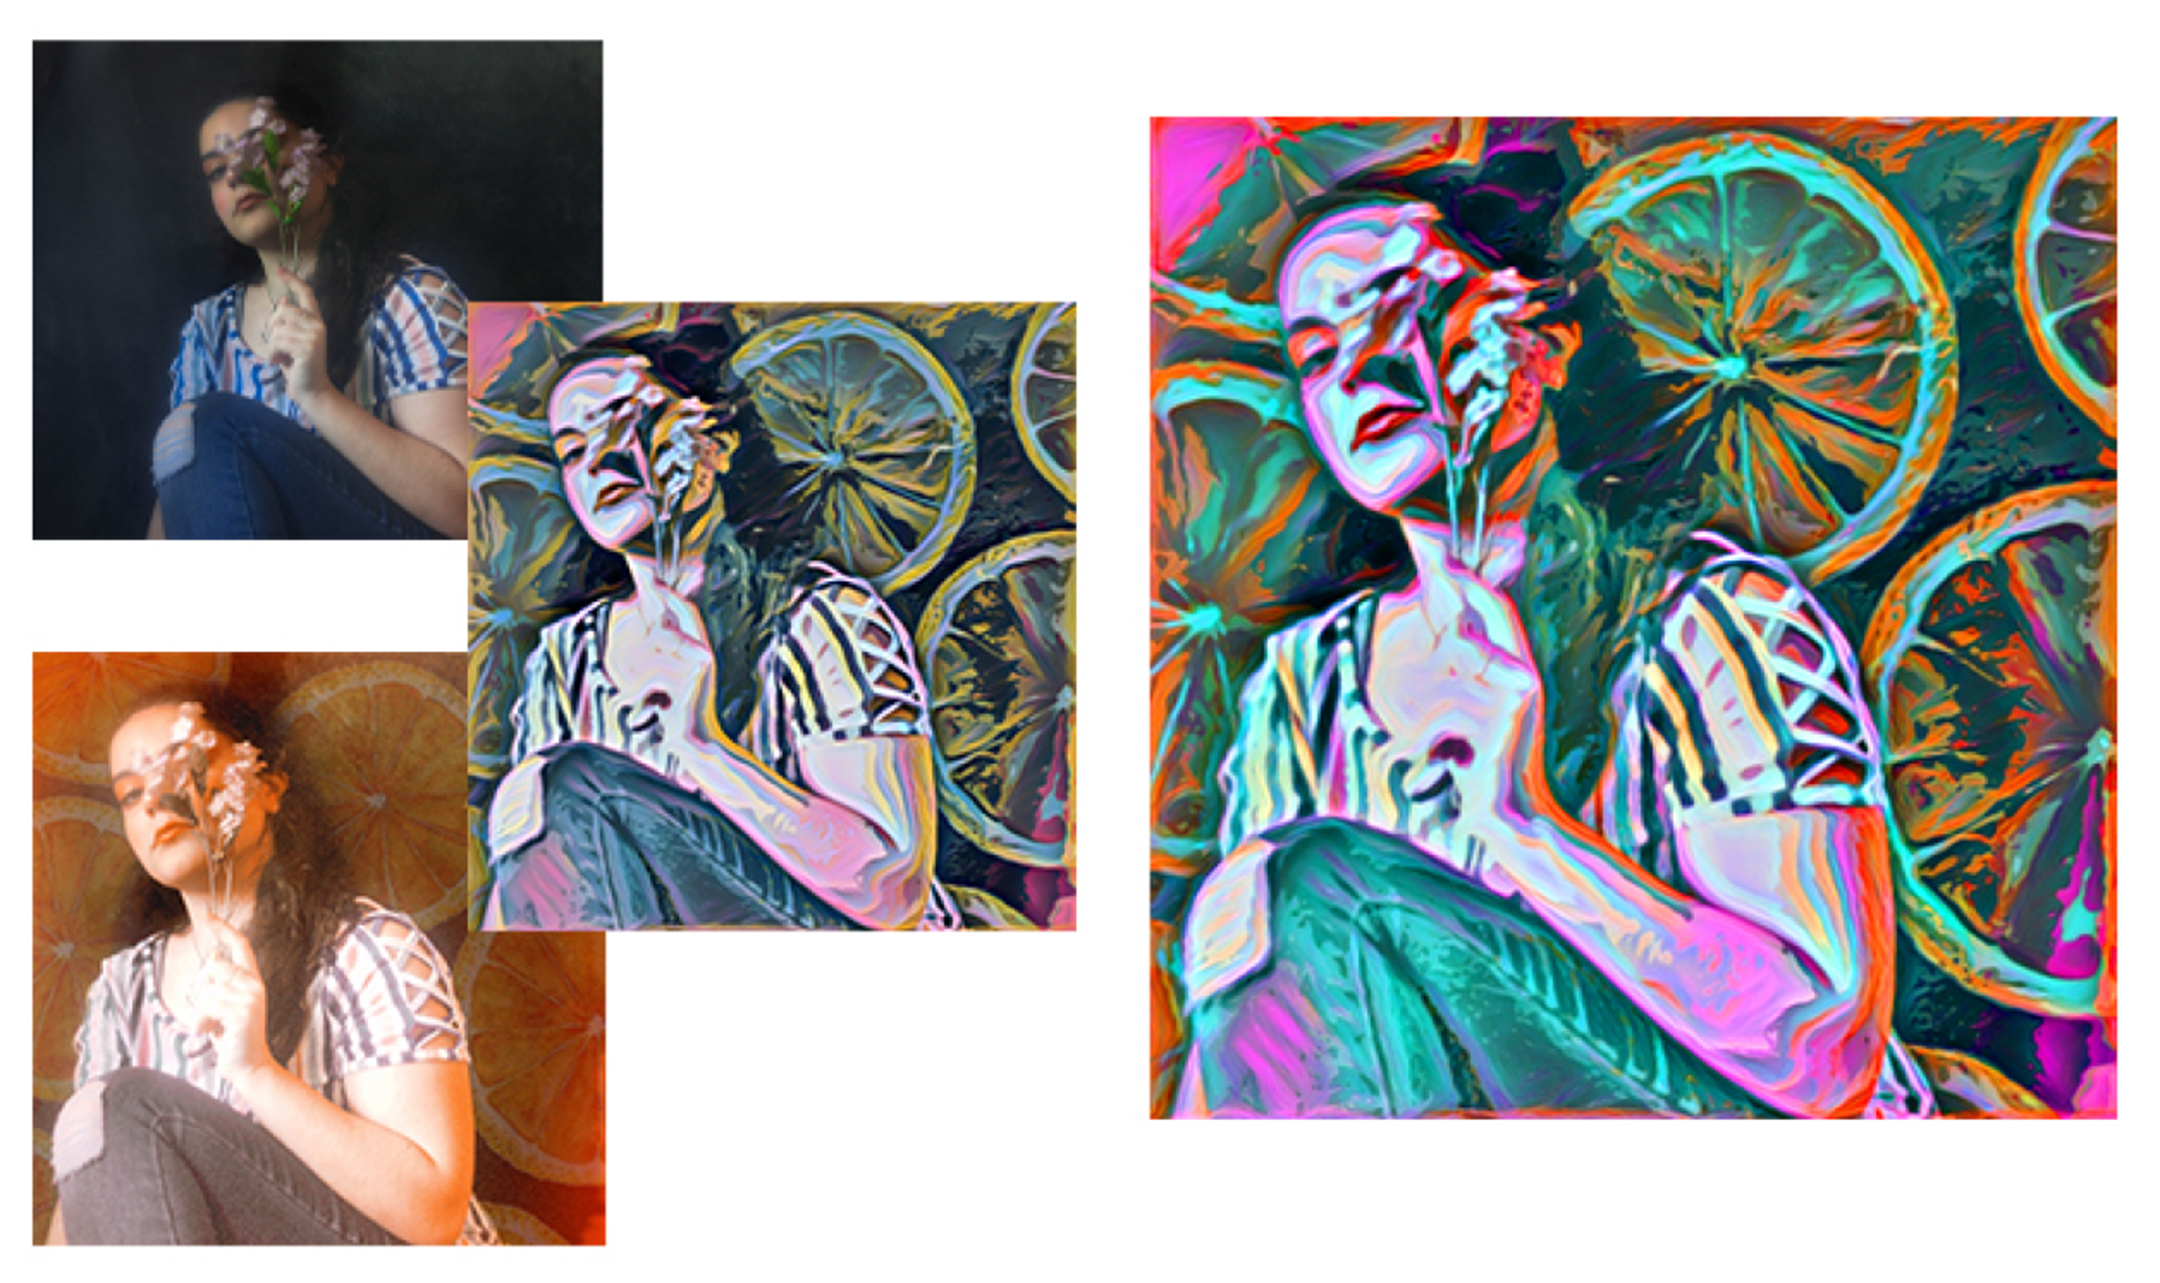 Three process images to the left of the previous image to show how it was created